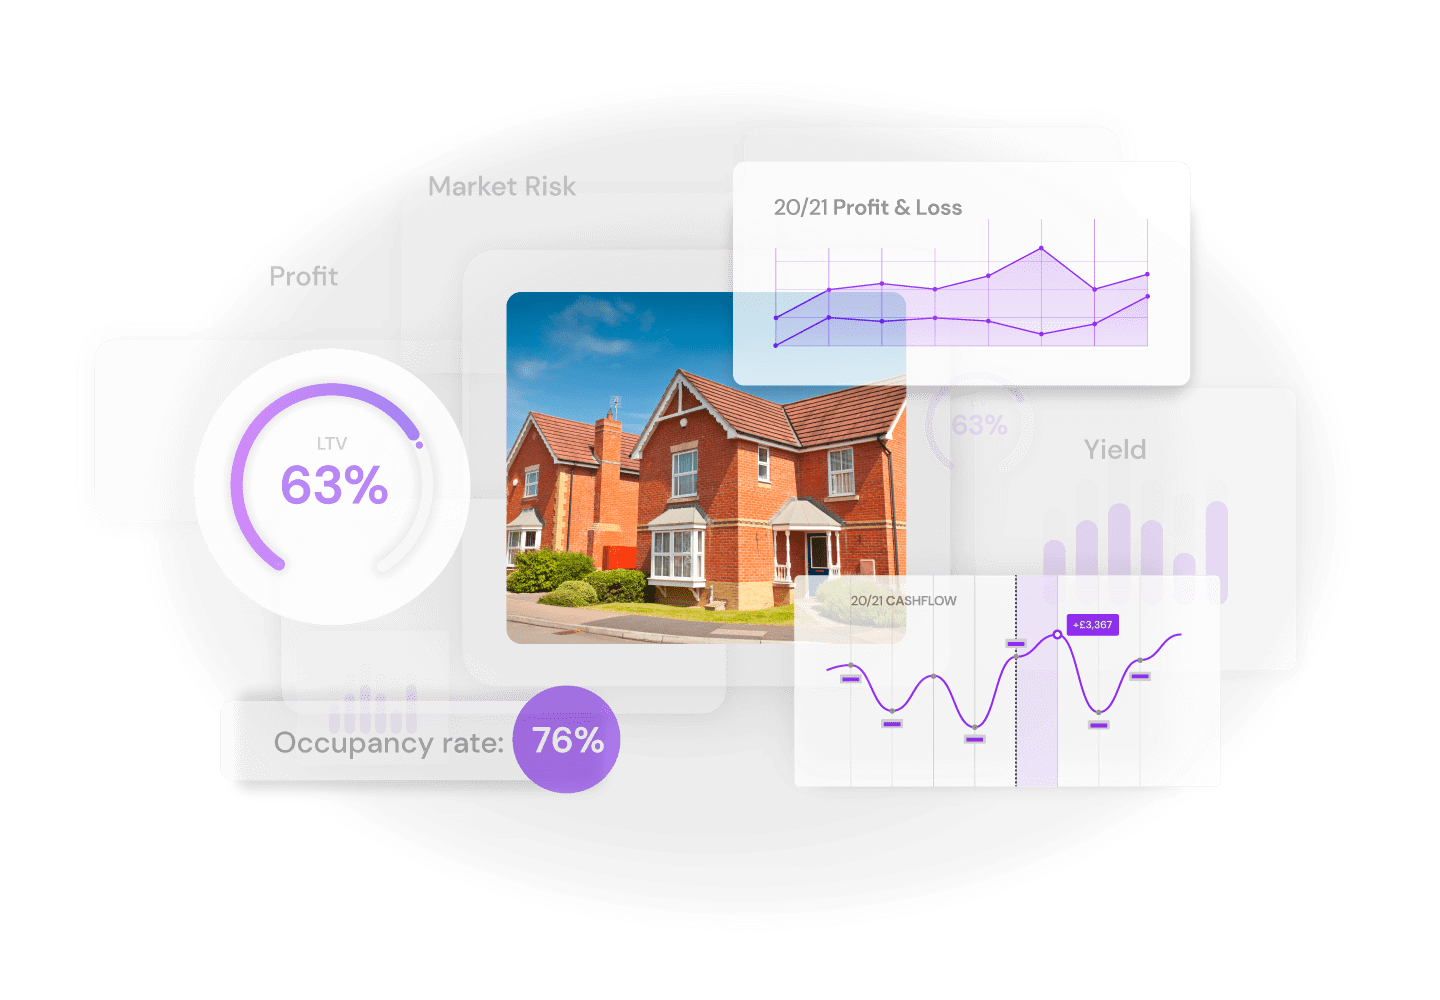 buy to let investments statistics for landlords at hammock